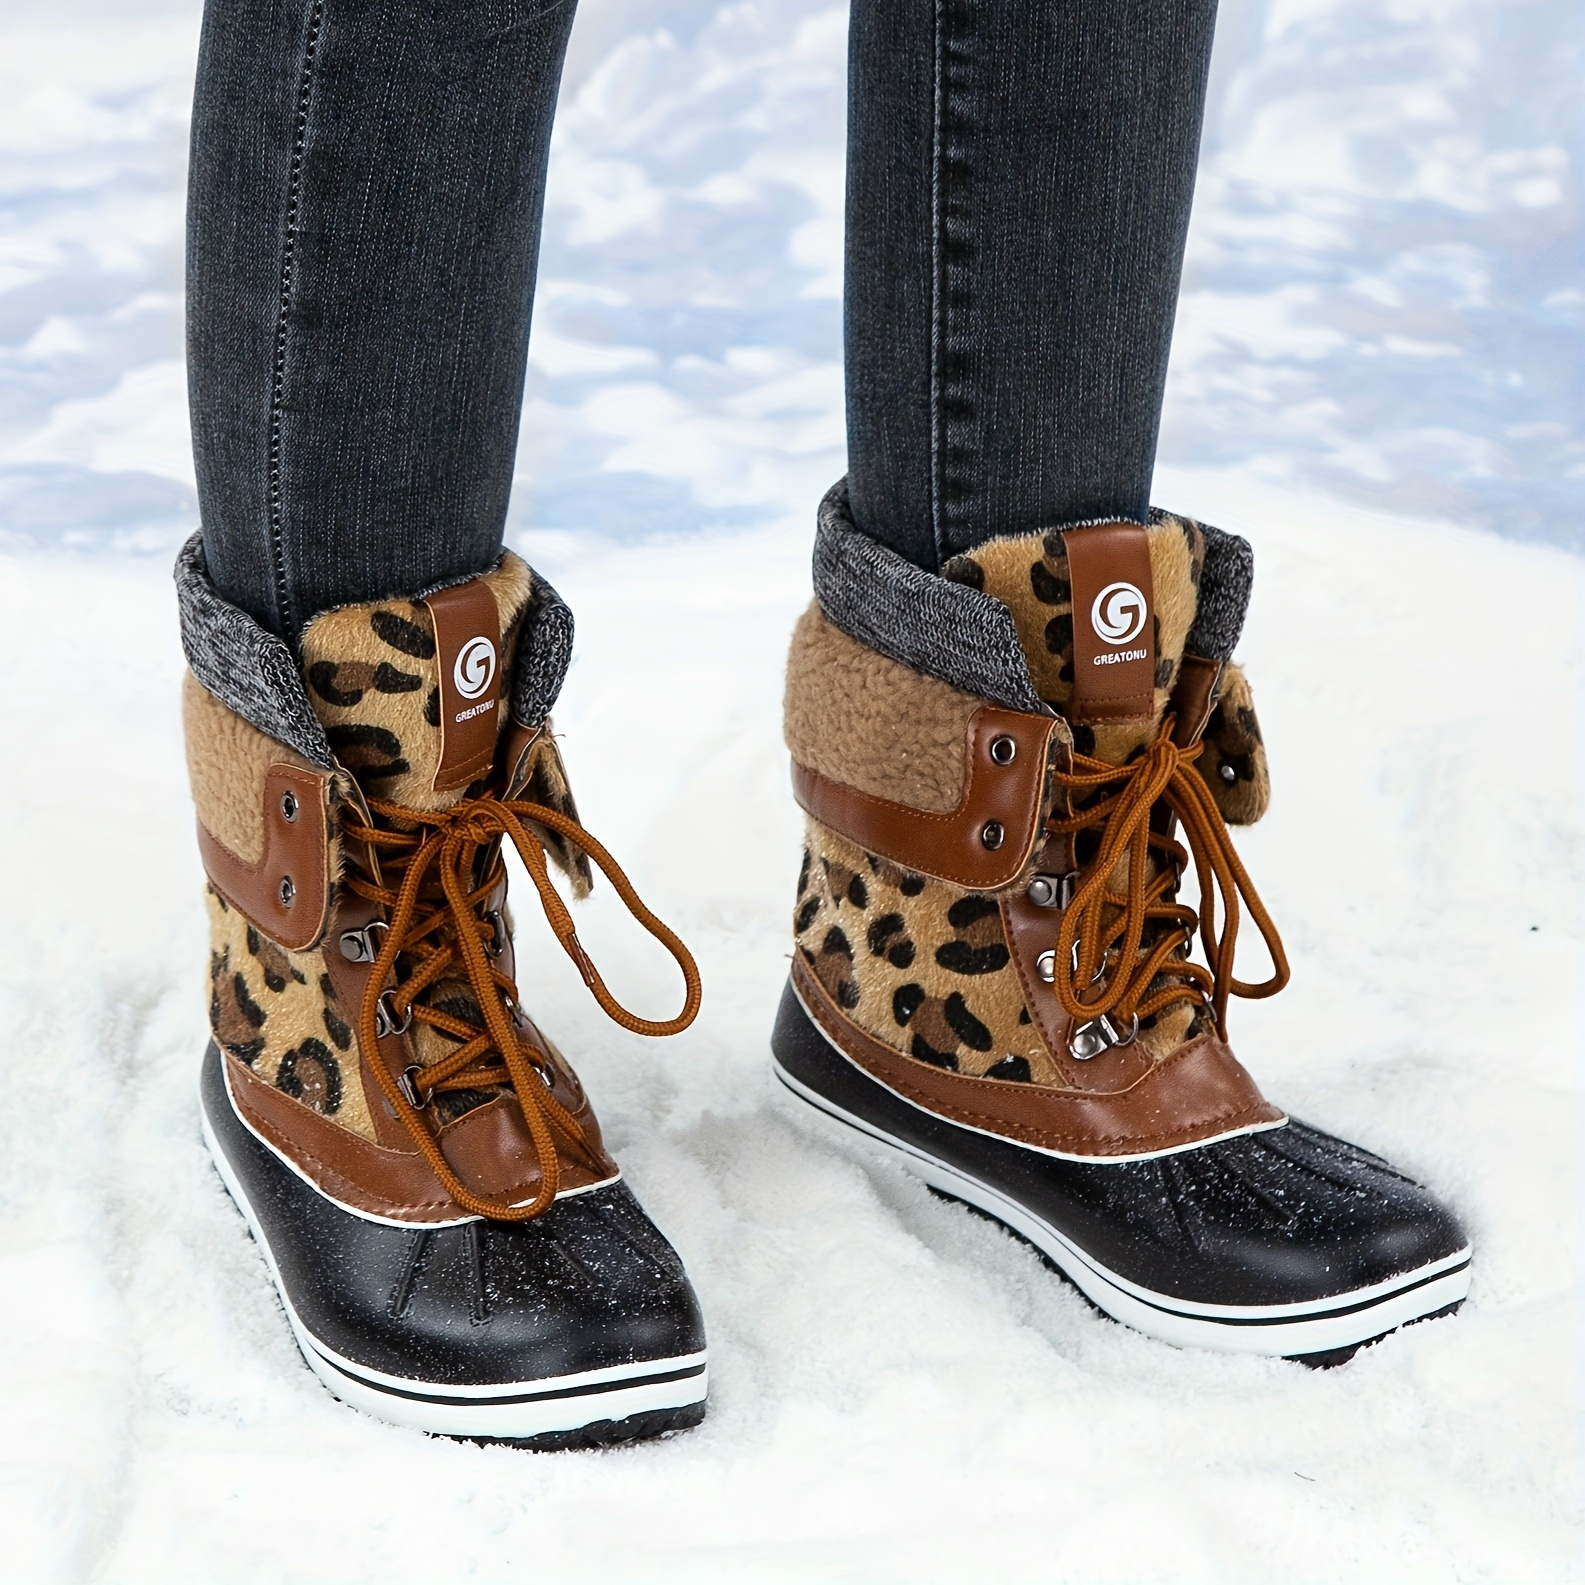 

Women's Leopard Printed Faux Fur Winter Duck Boots, Non-slip Insulated Mid Calf Boots For Outdoor Hiking Trekking